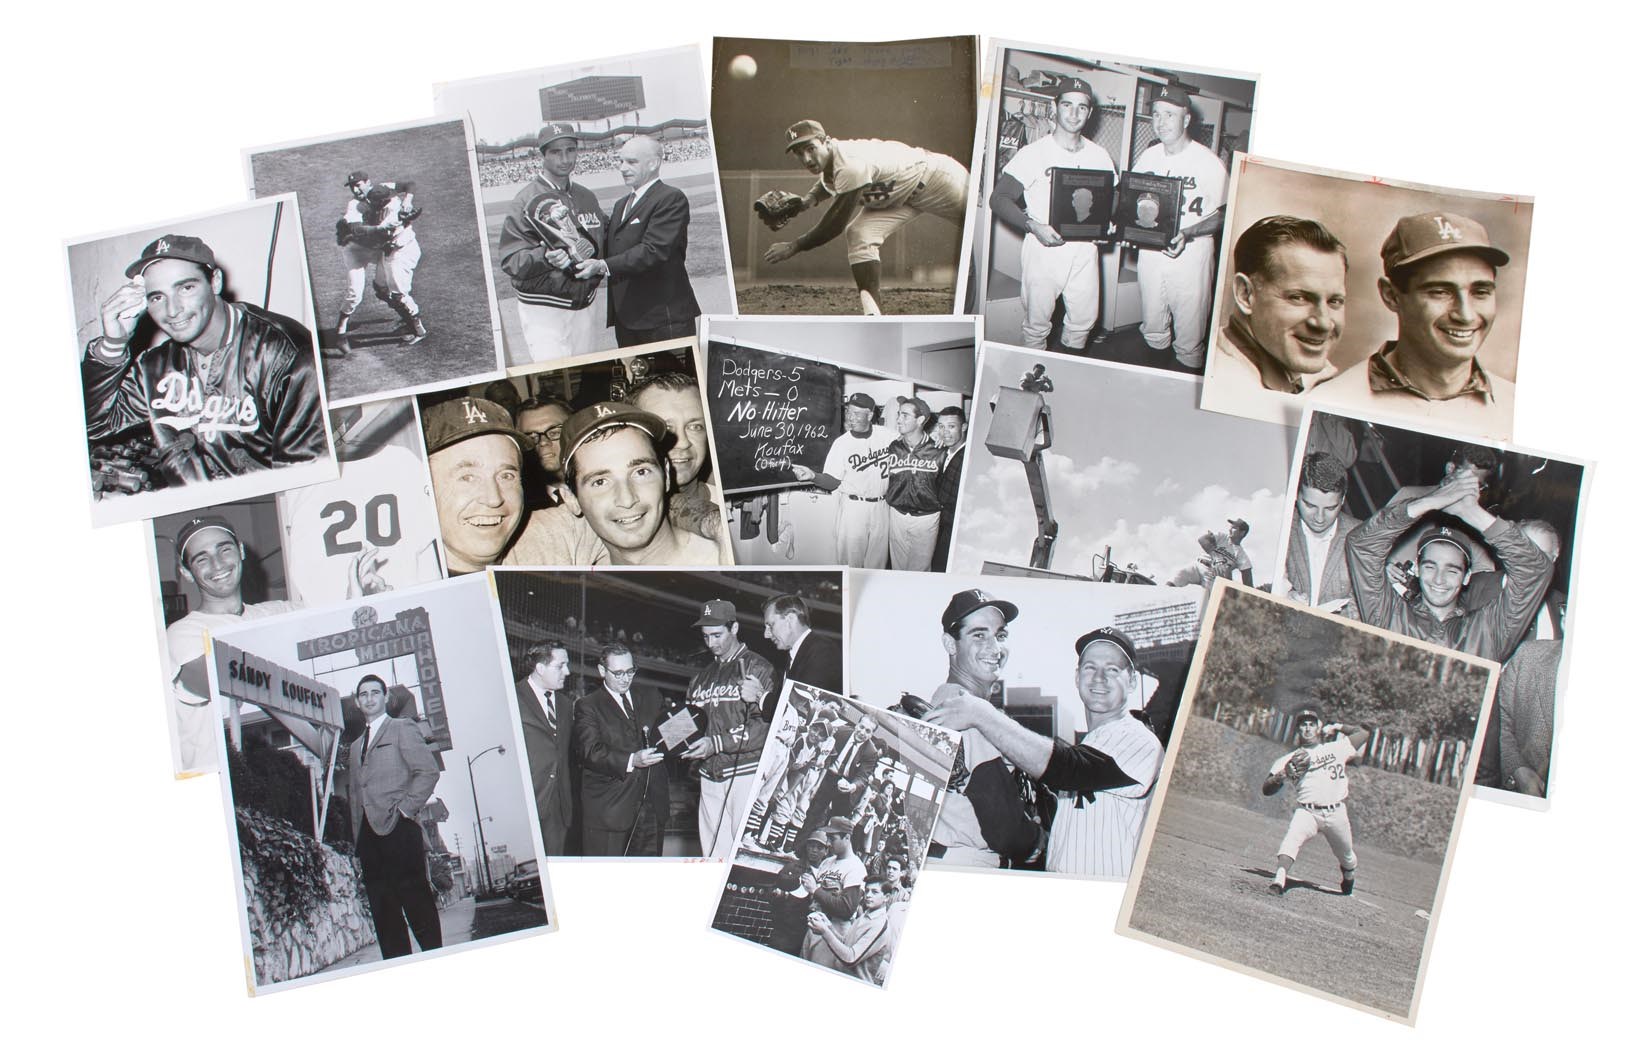 Jackie Robinson & Brooklyn Dodgers - Exceptional 1950-60s Sandy Koufax Photograph Archive (16)